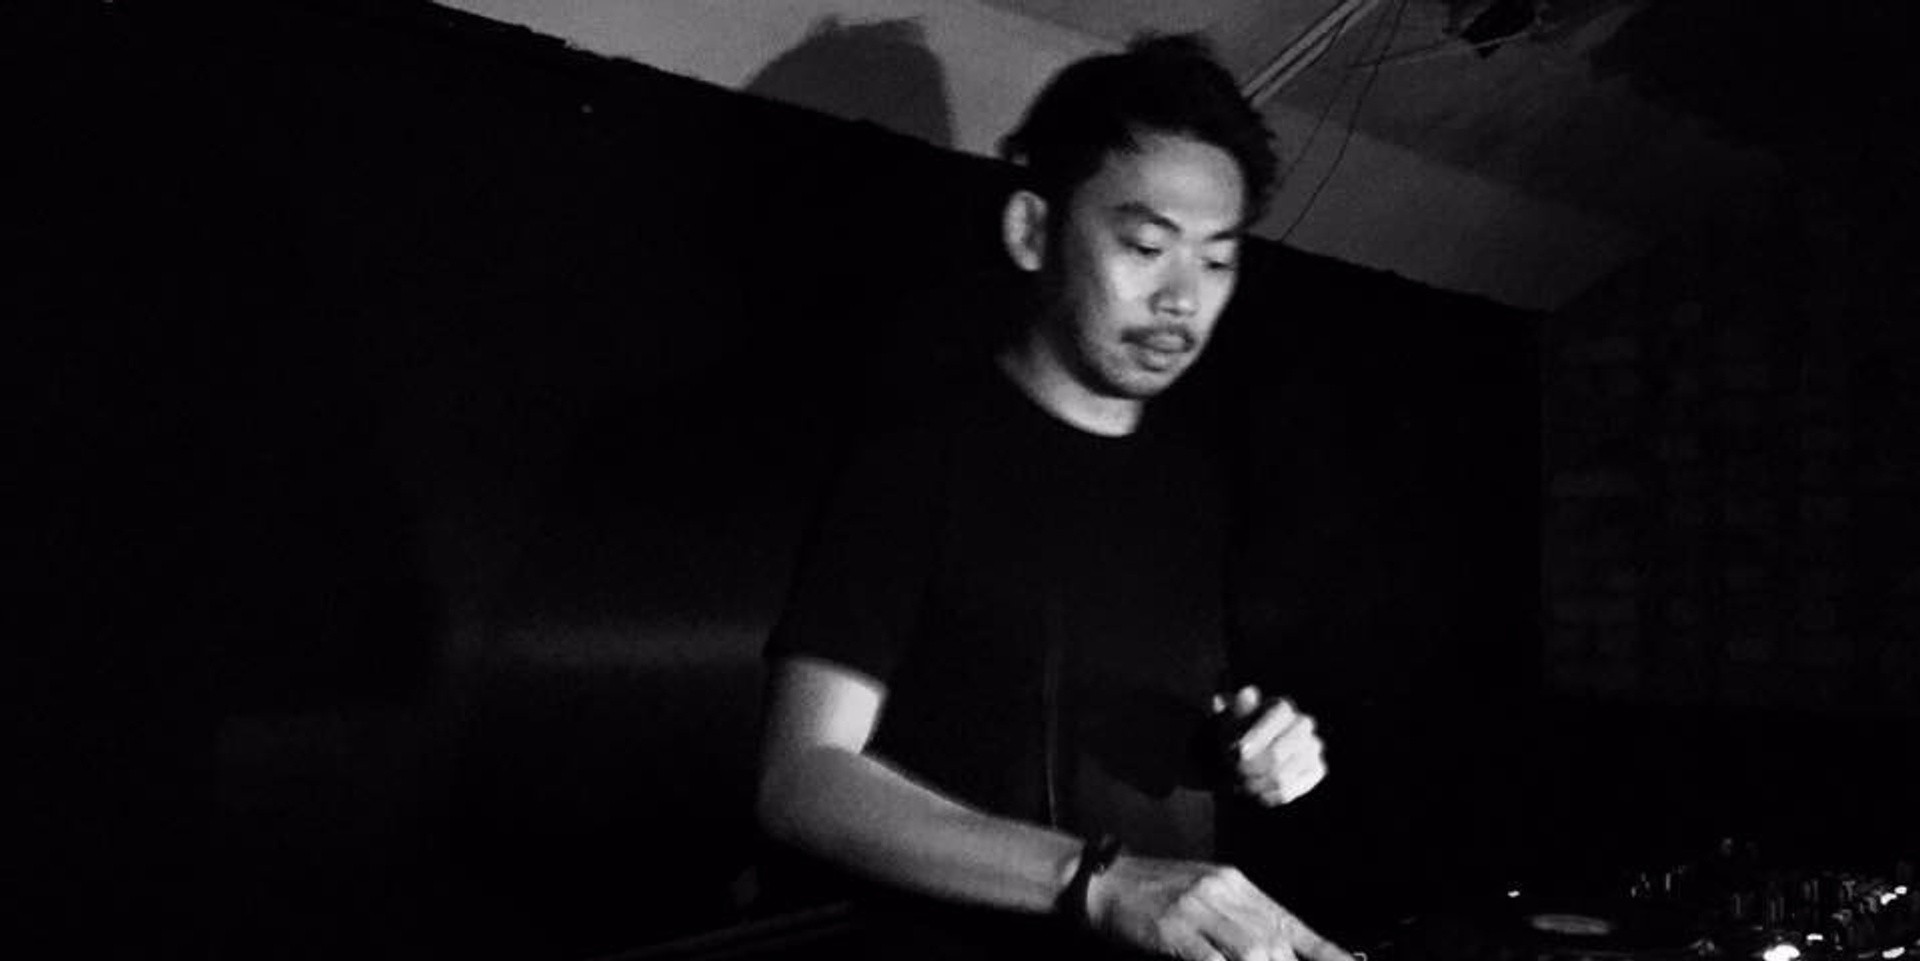 Stellar techno from Singapore via Gerald Ang's new EP on SoulMatters Recordings, Silence – listen